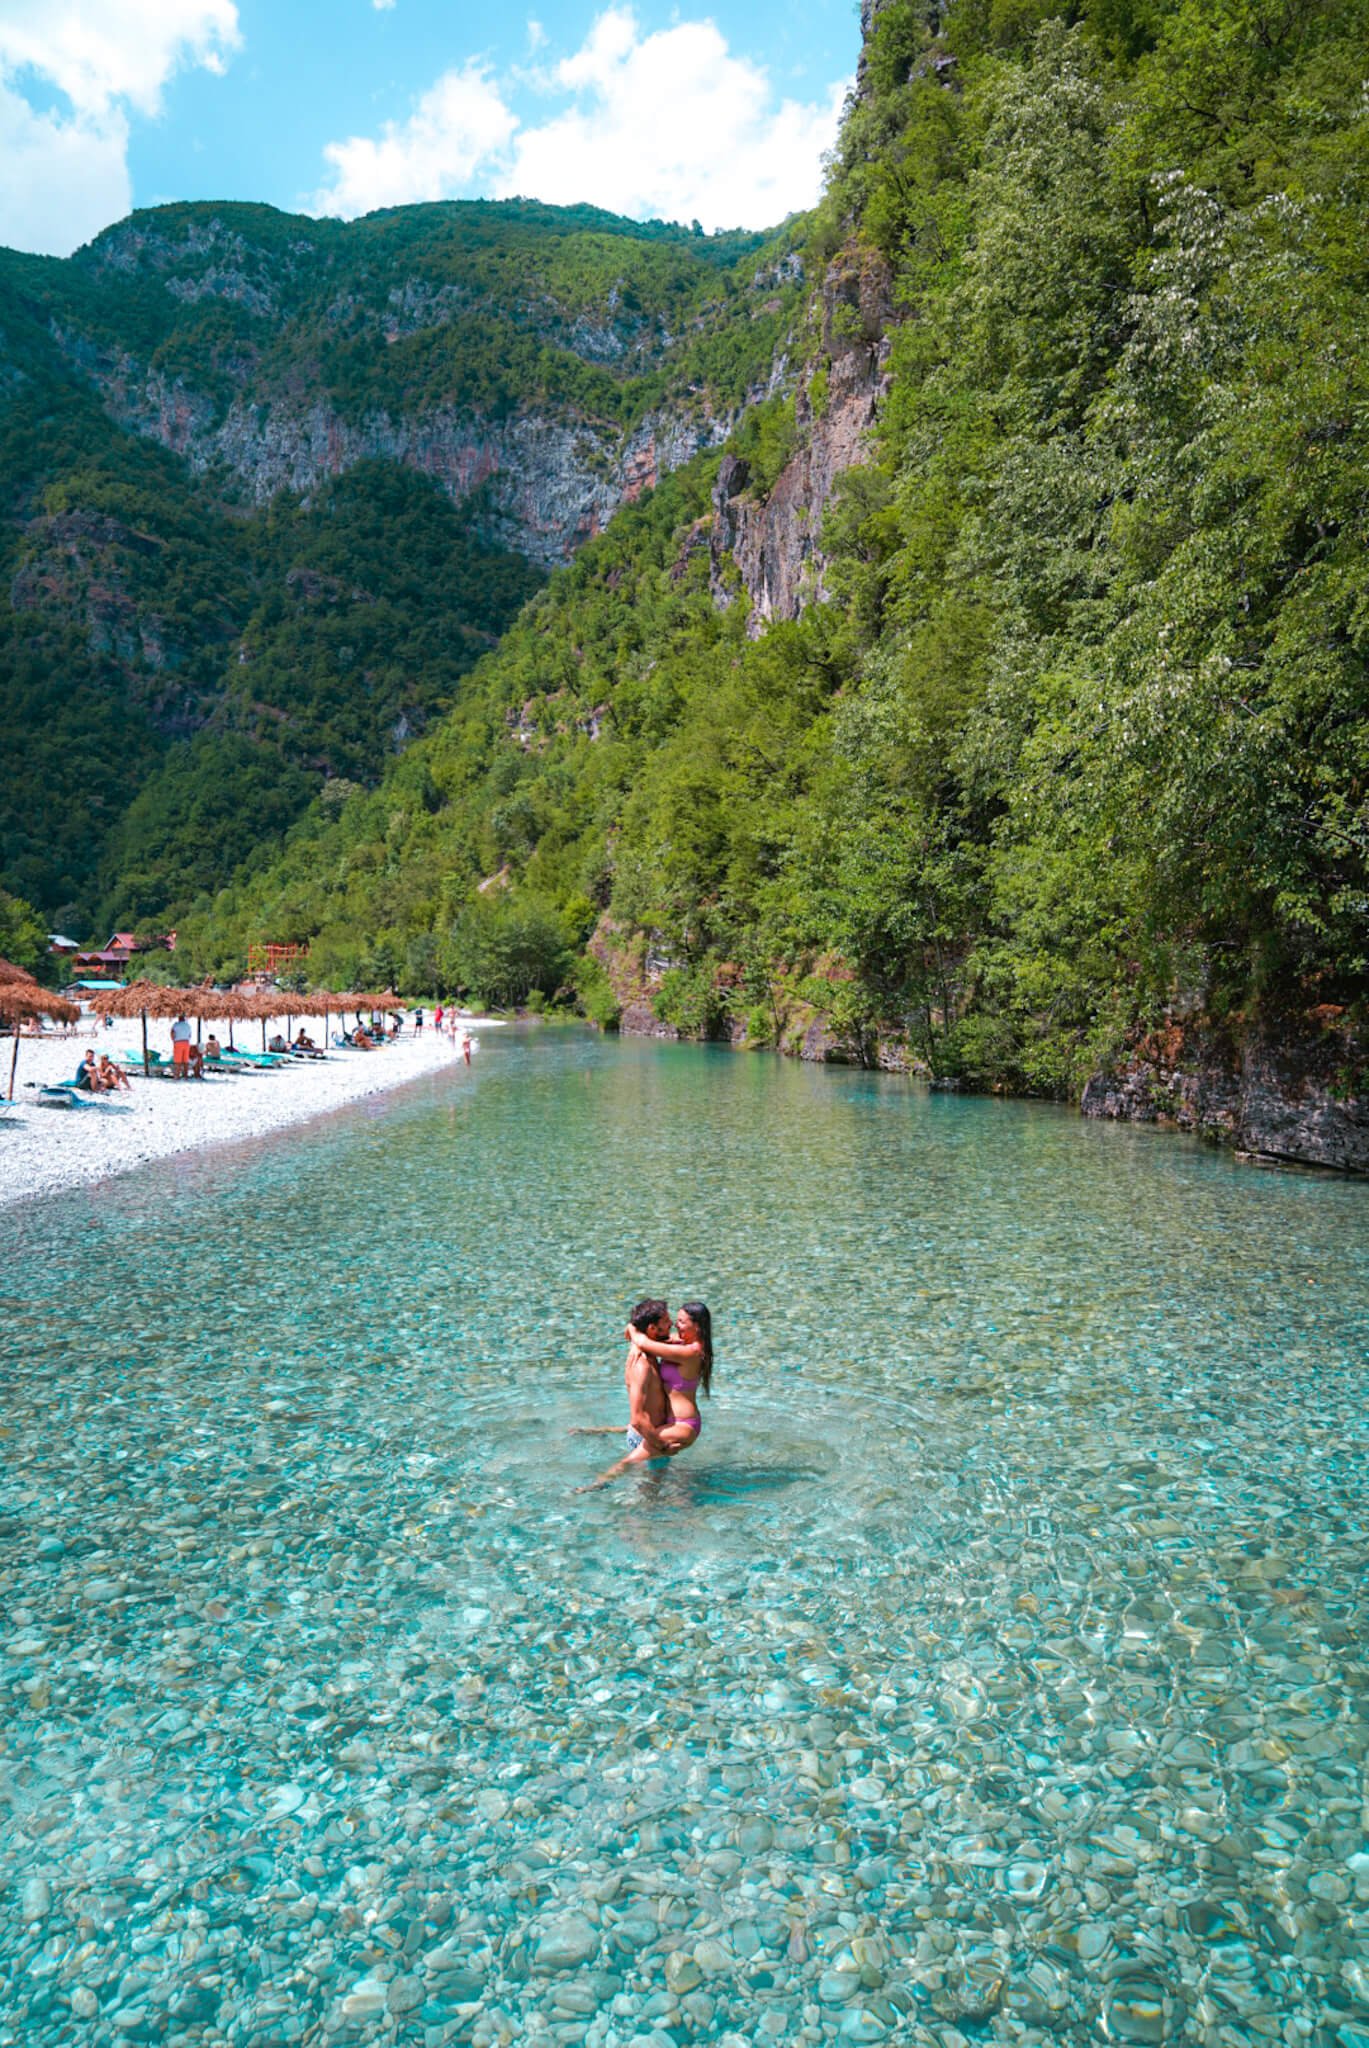  Lumi I Shales, an incredible place in Albania